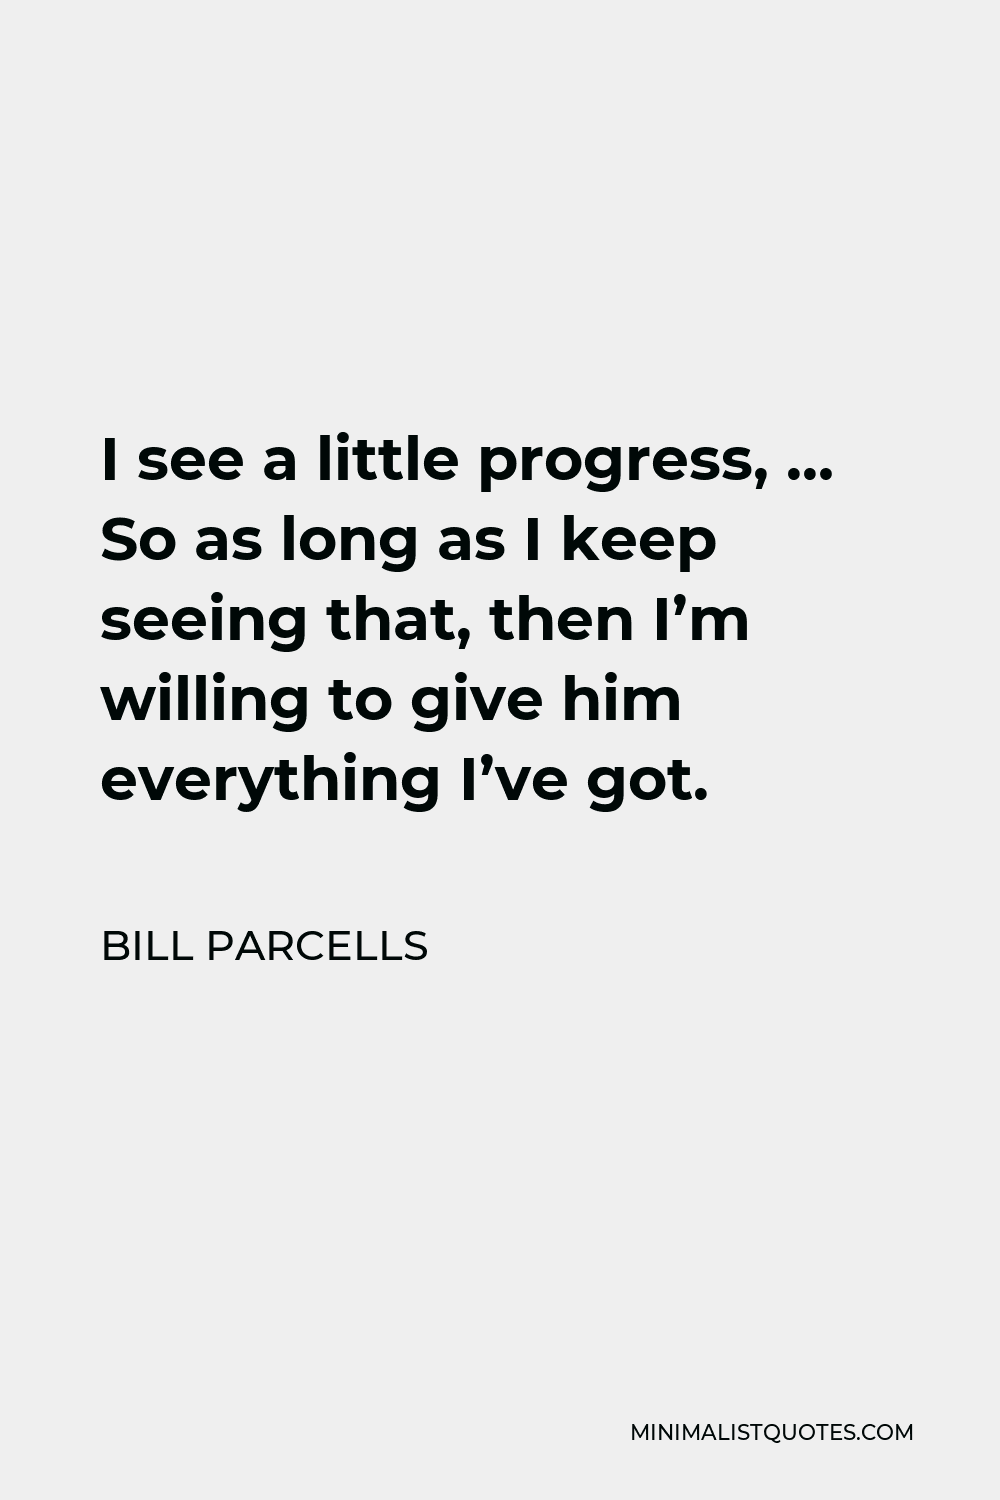 Bill Parcells Quote I see a little progress, So as long as I keep